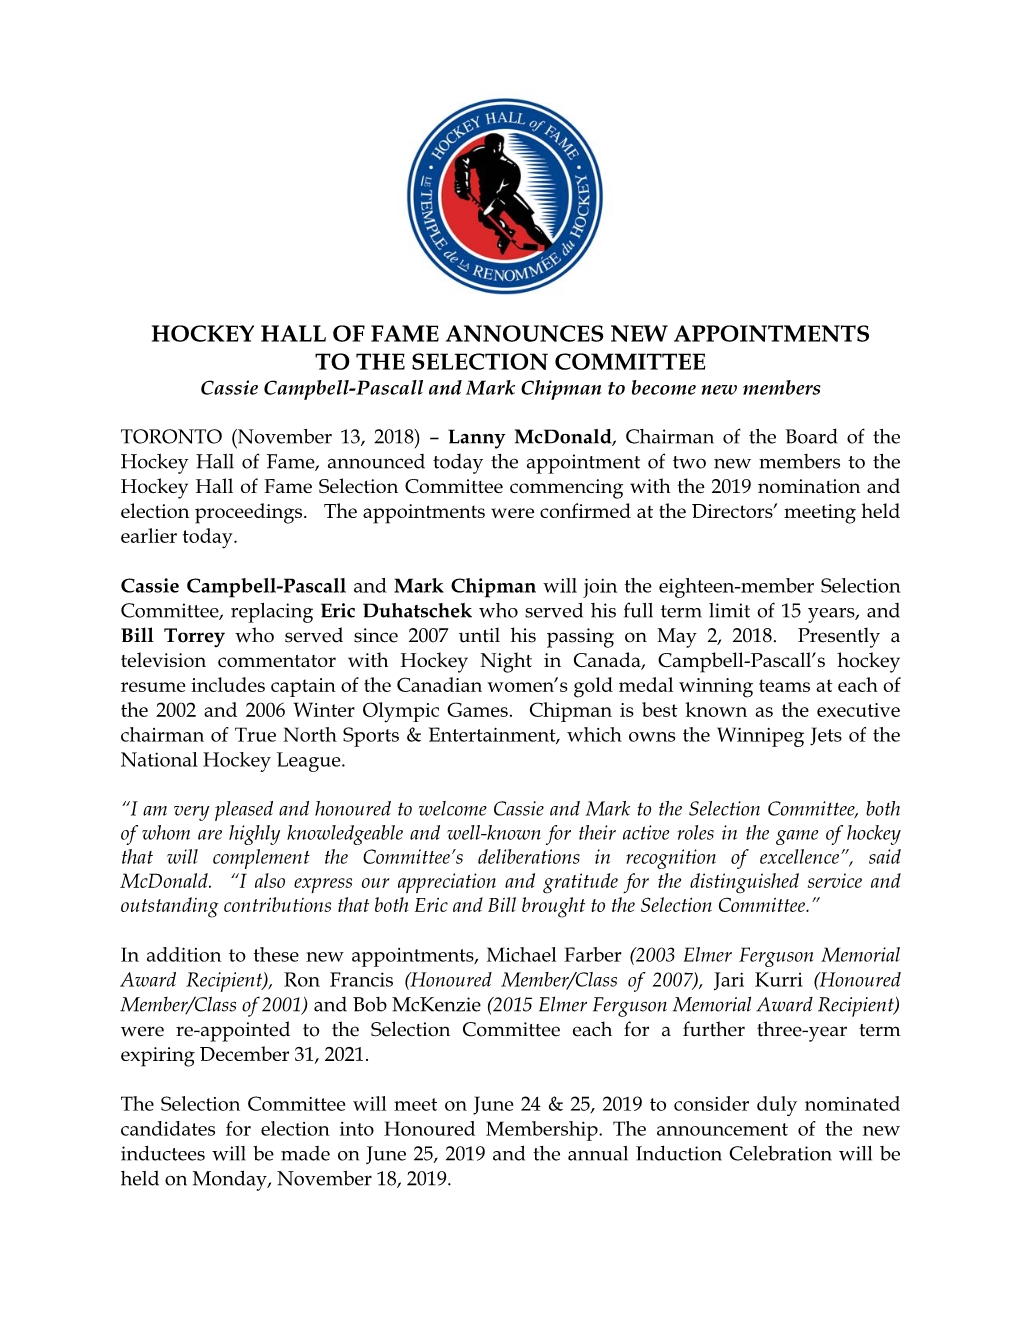 HOCKEY HALL of FAME ANNOUNCES NEW APPOINTMENTS to the SELECTION COMMITTEE Cassie Campbell-Pascall and Mark Chipman to Become New Members